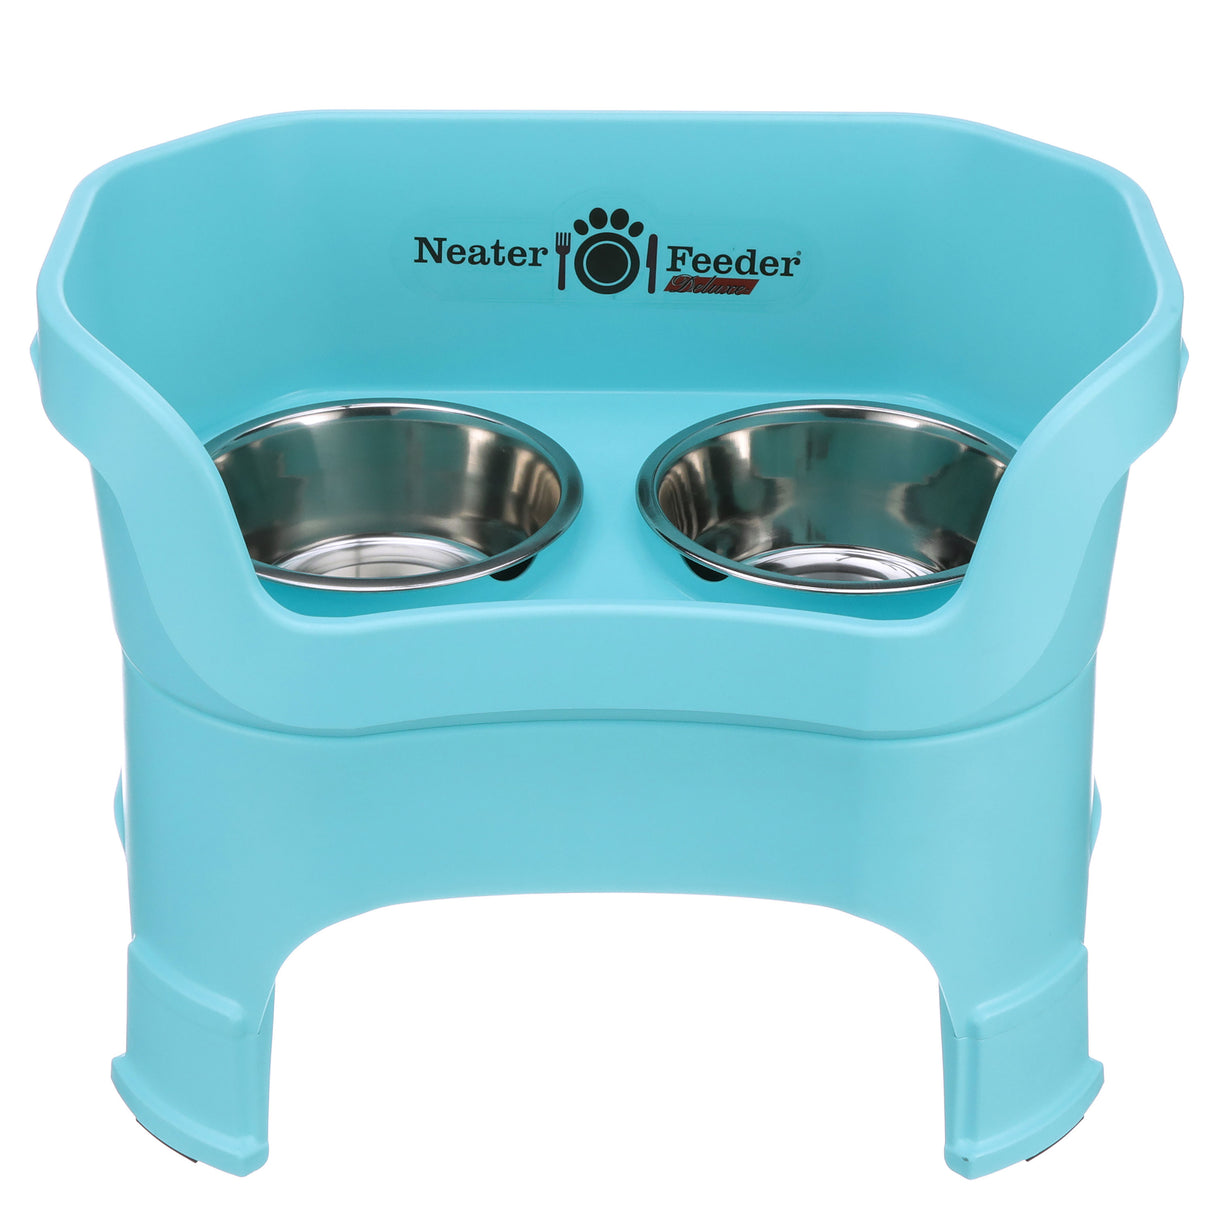 Deluxe Large Neater Feeder with leg extensions in Aqua